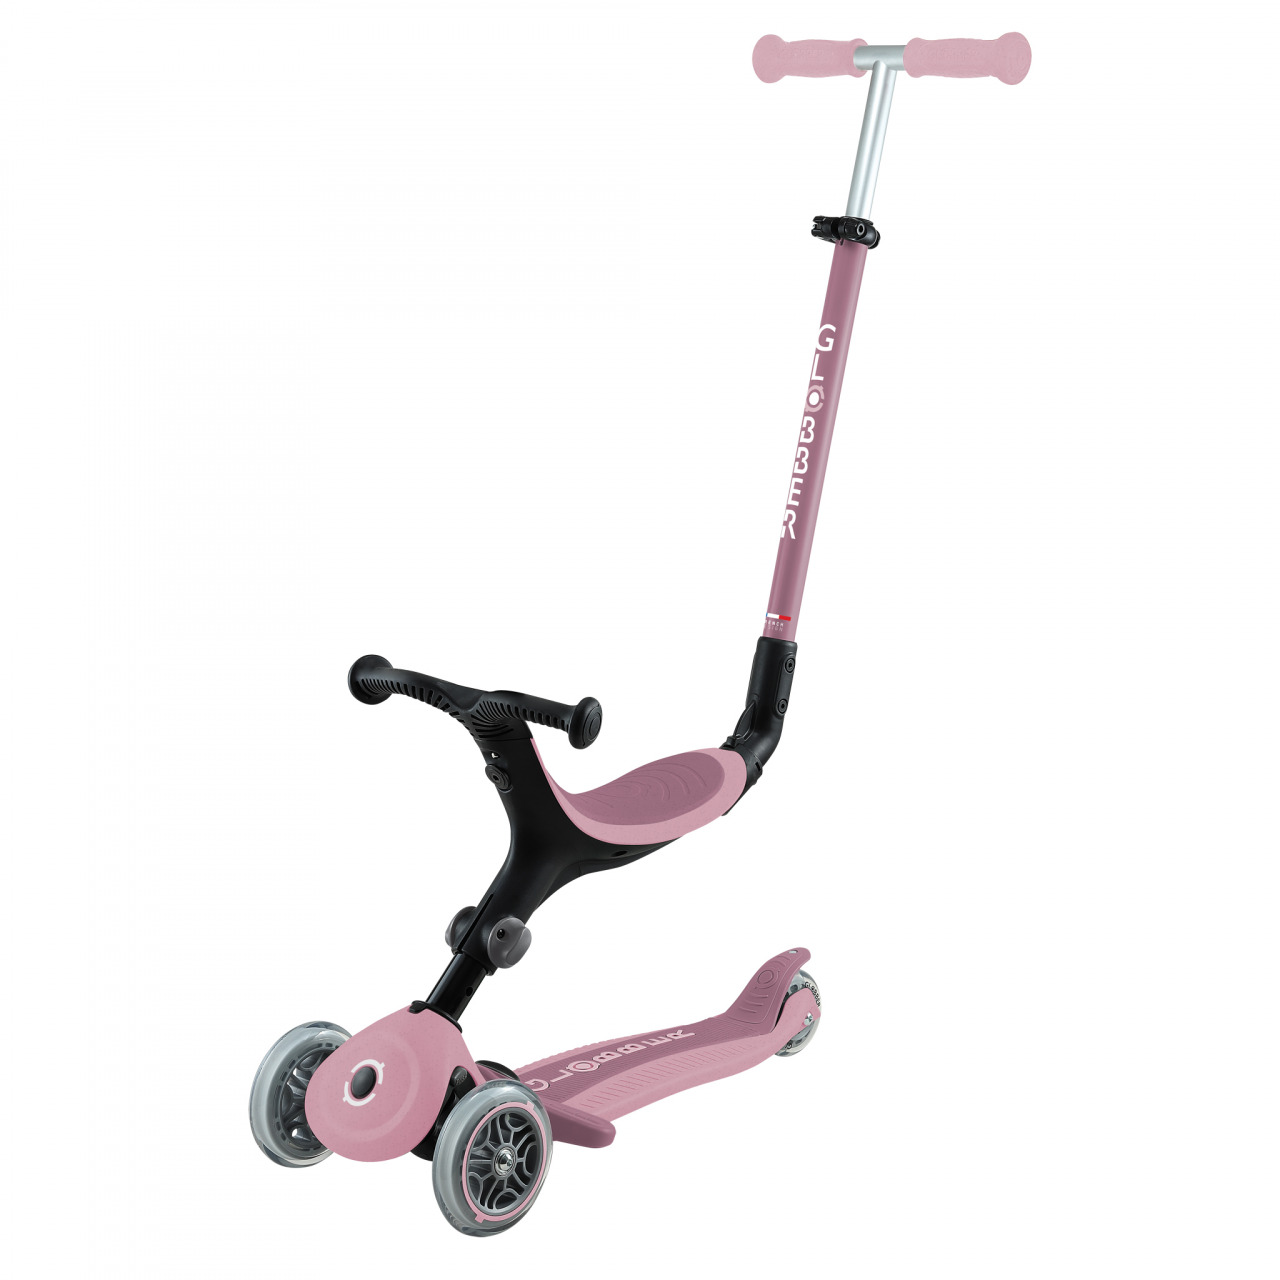 740 510 3 In 1 Eco Scooter